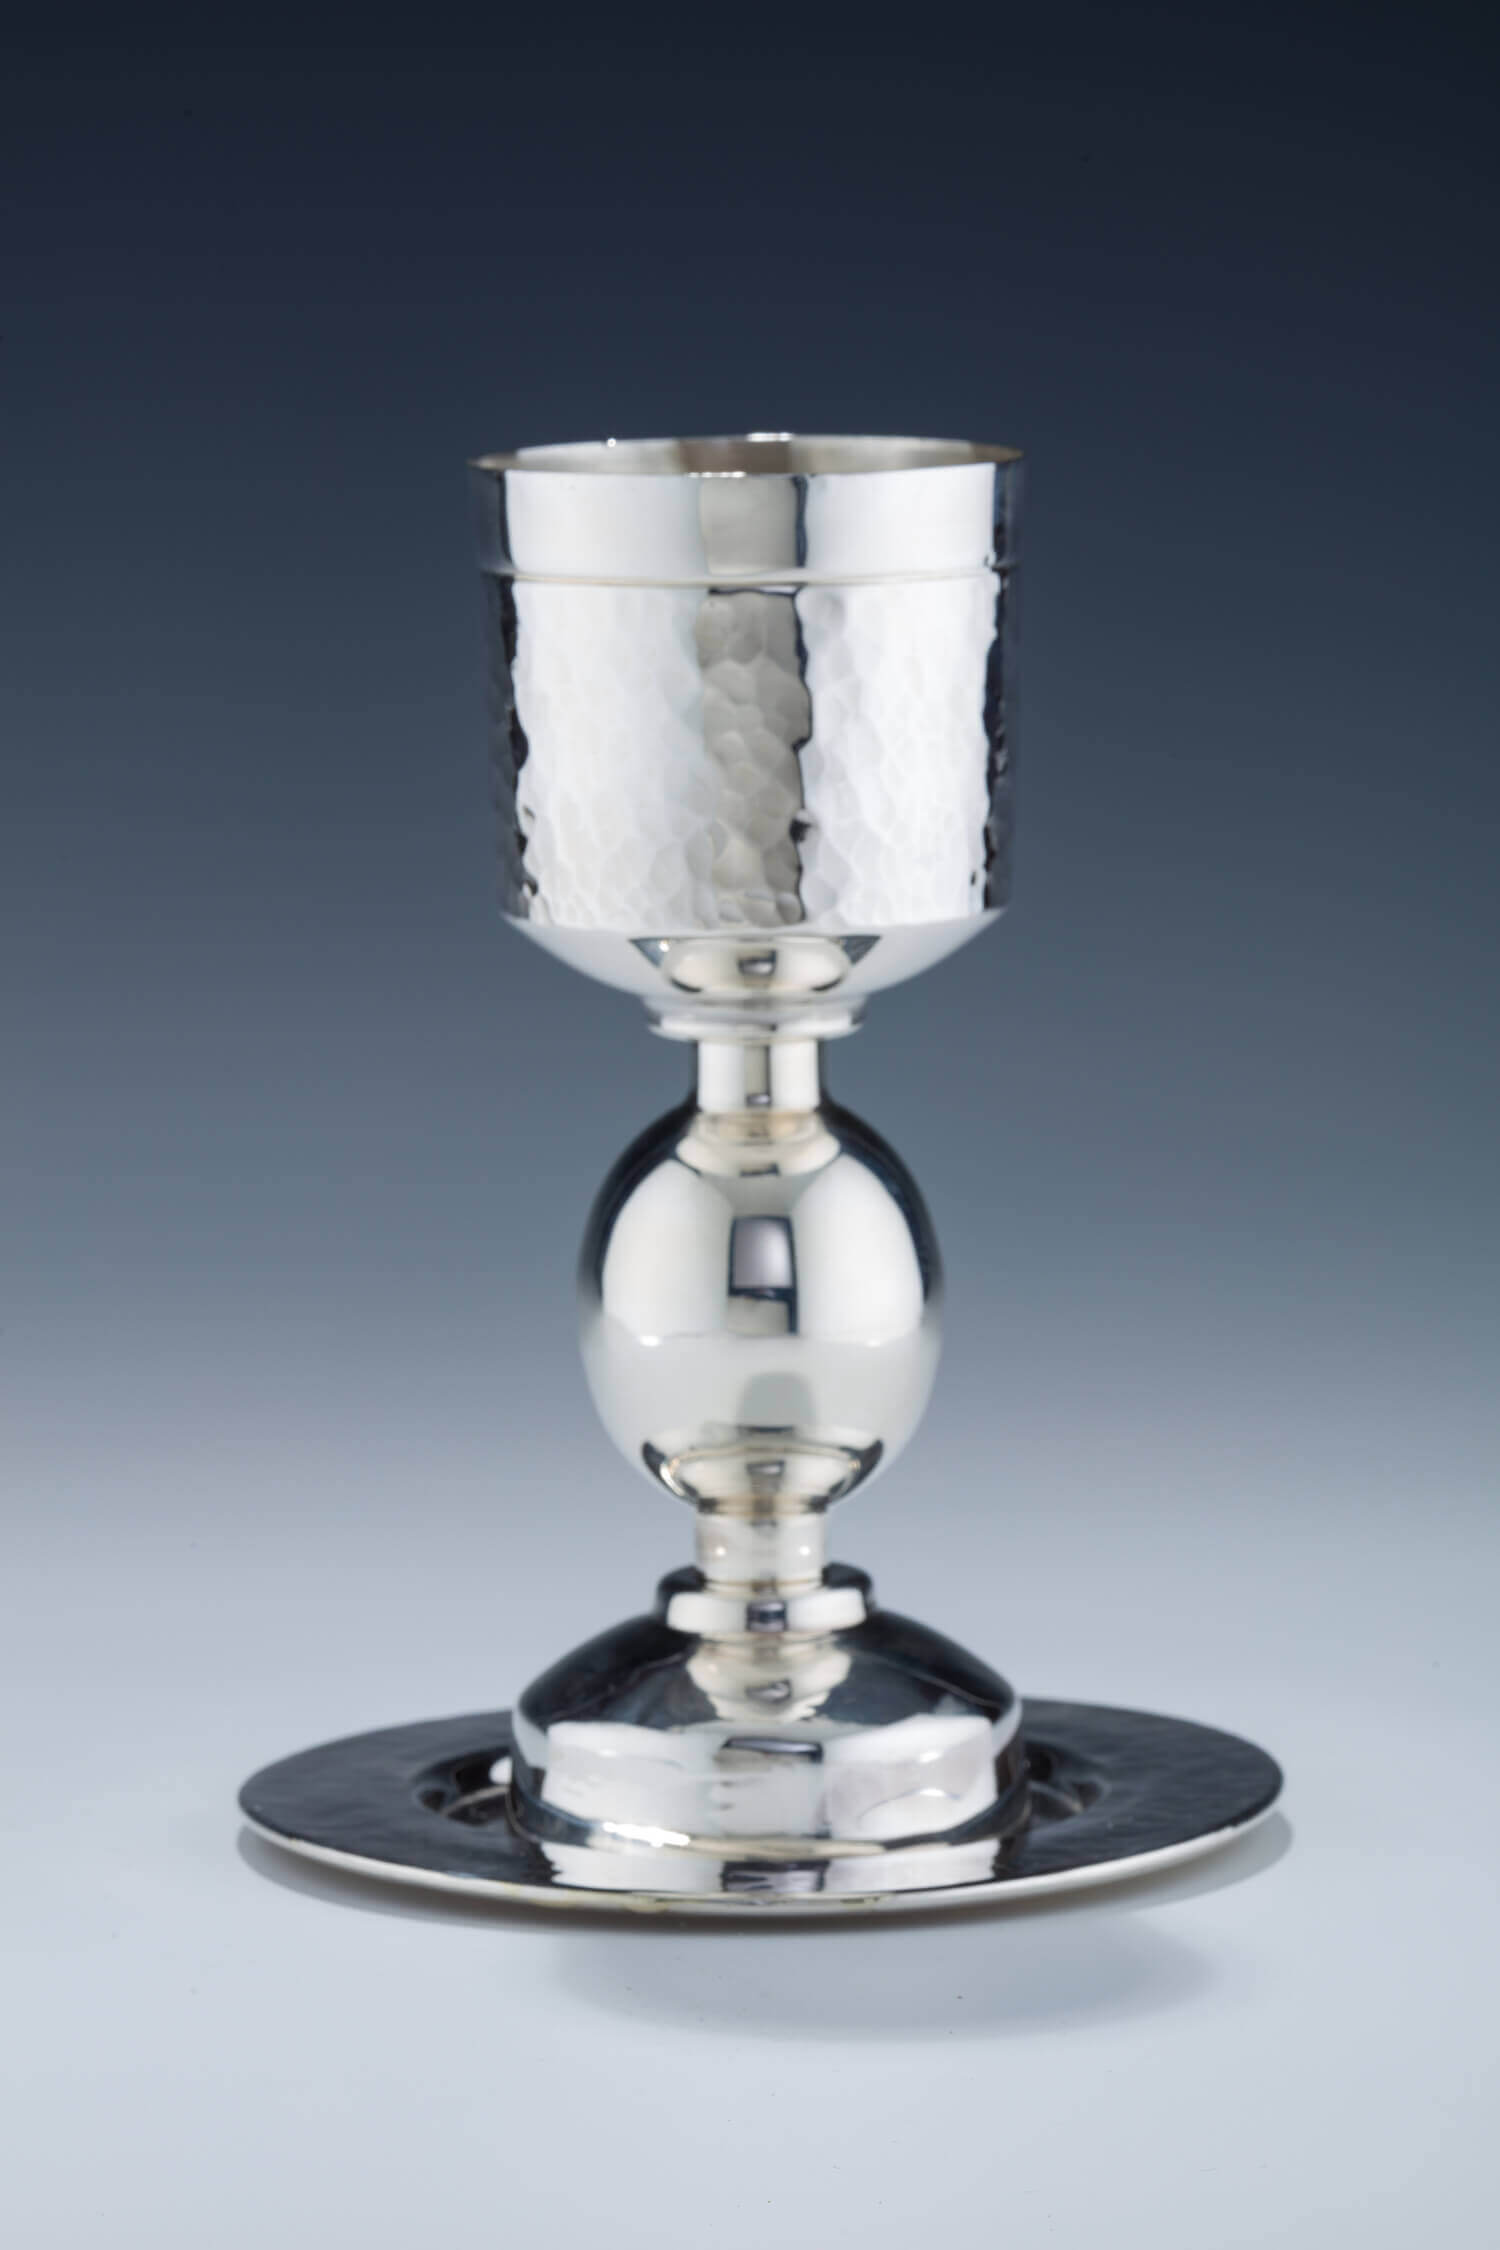 096. A LARGE STERLING SILVER KIDDUSH GOBLET AND UNDERPLATE BY BIER SILVERSMITHS